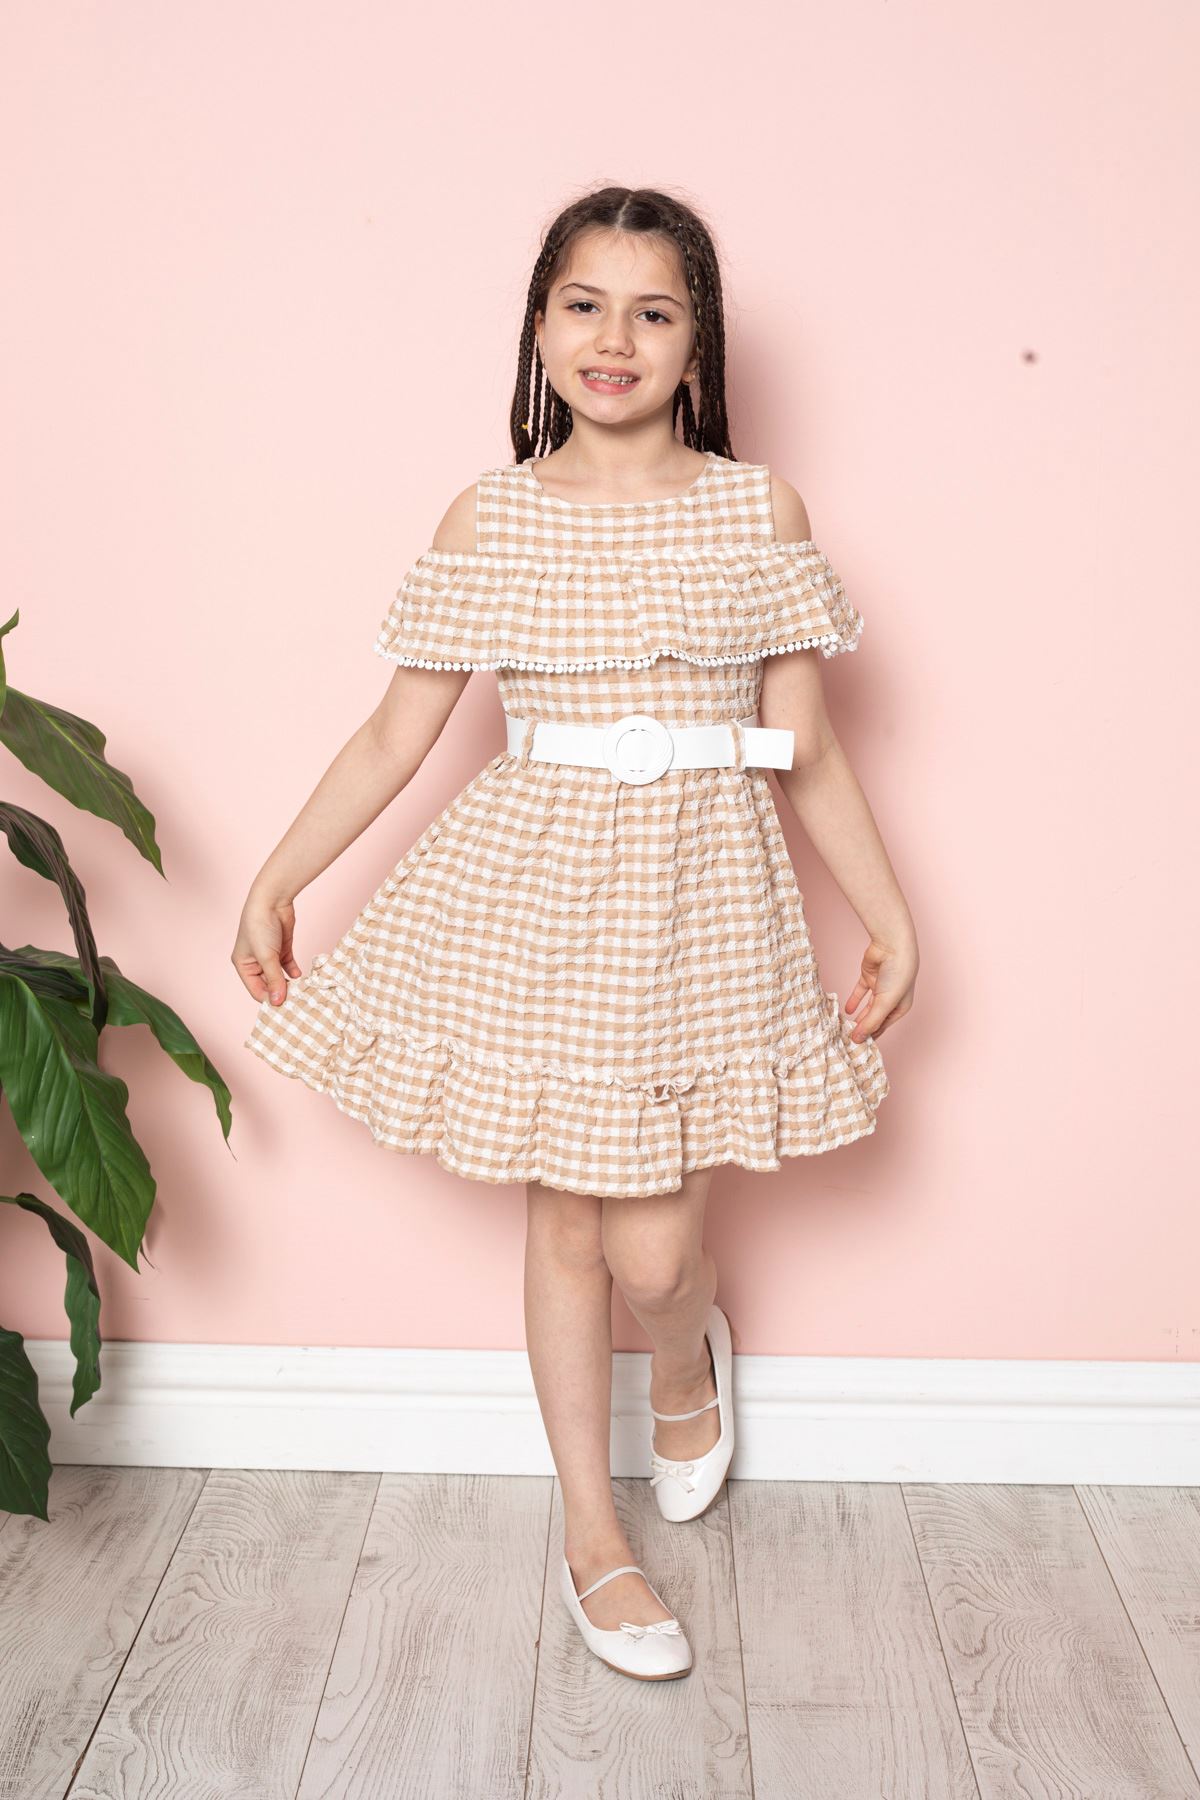 Square Patterned Girl's Dress with Hat